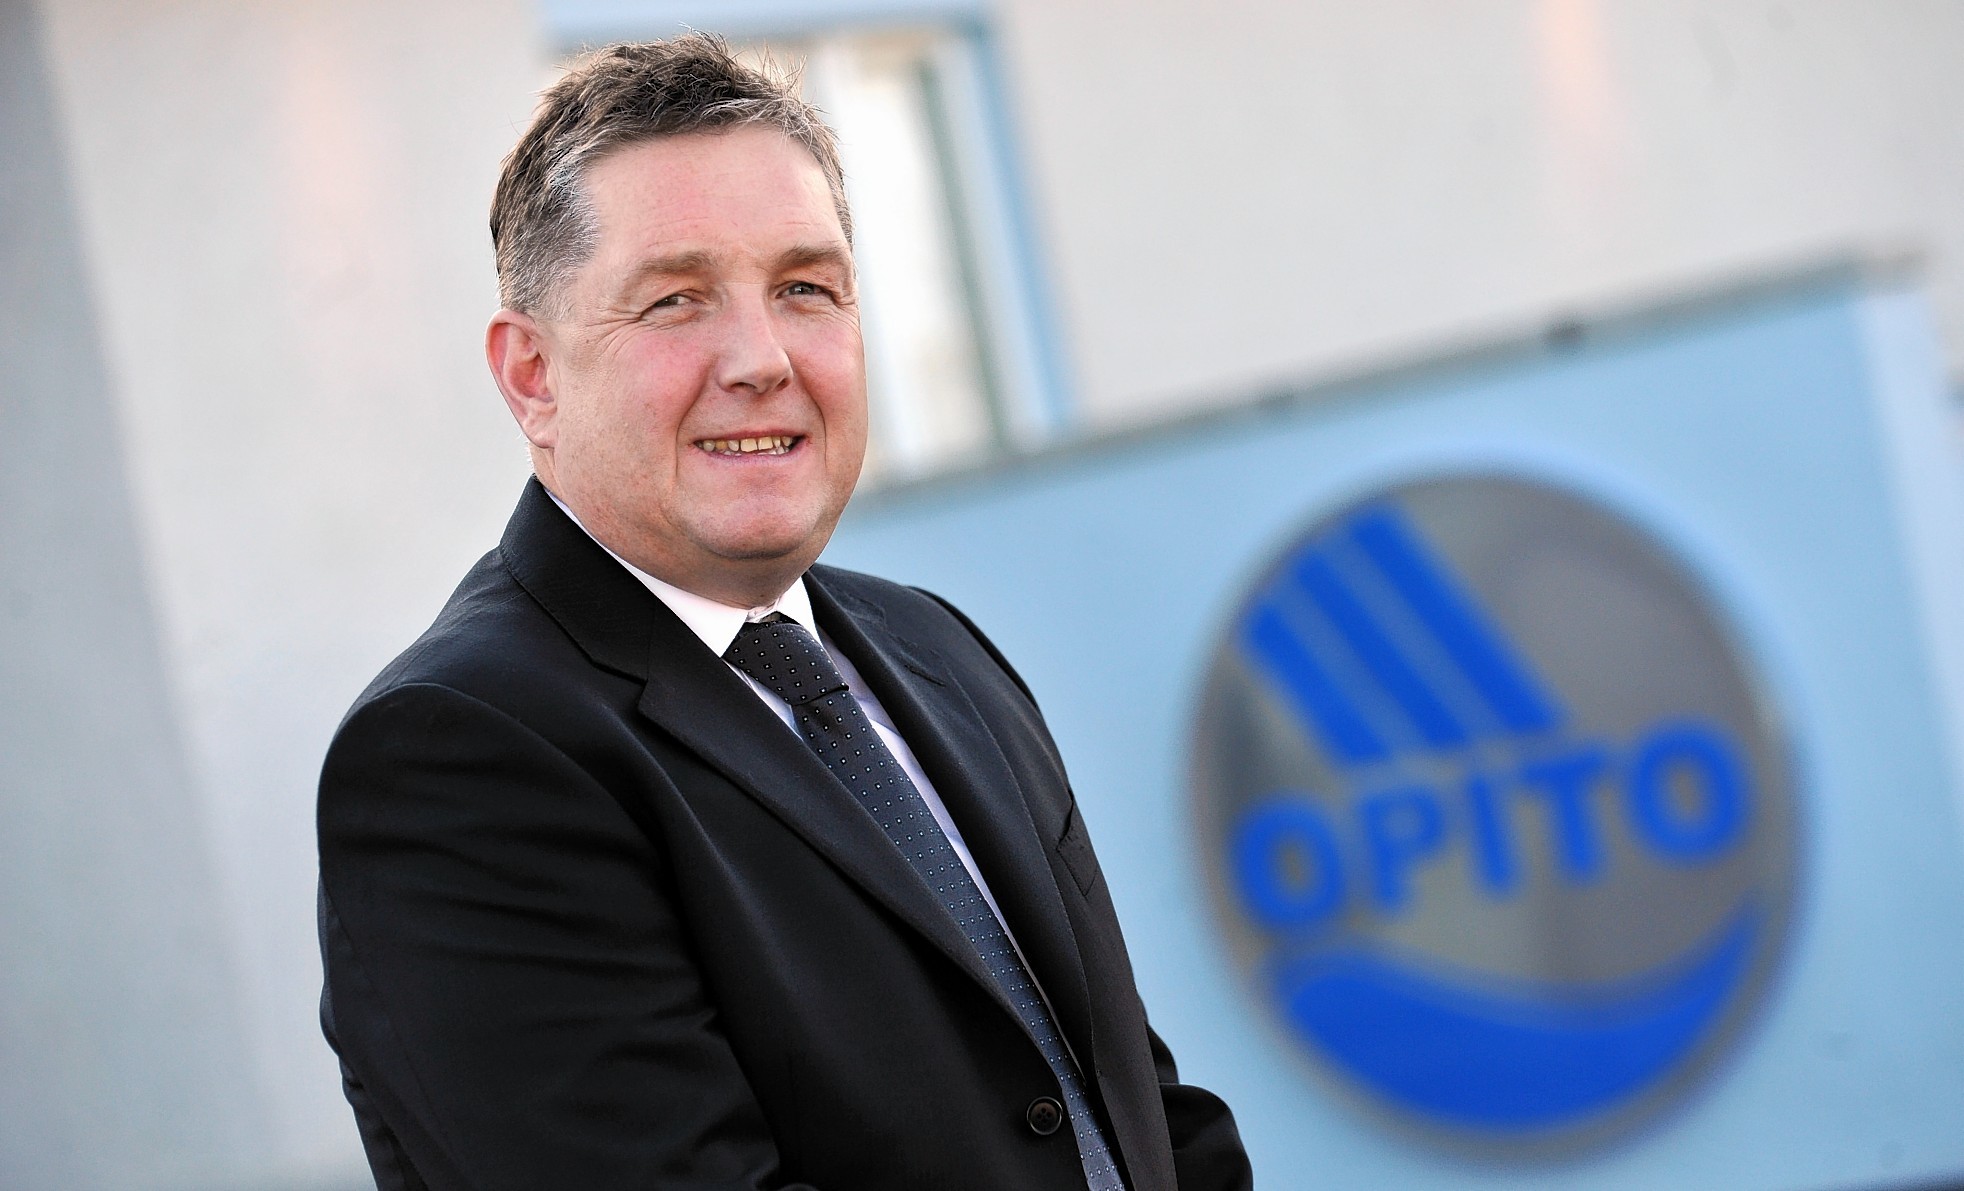 The late Opito CEO David Doig